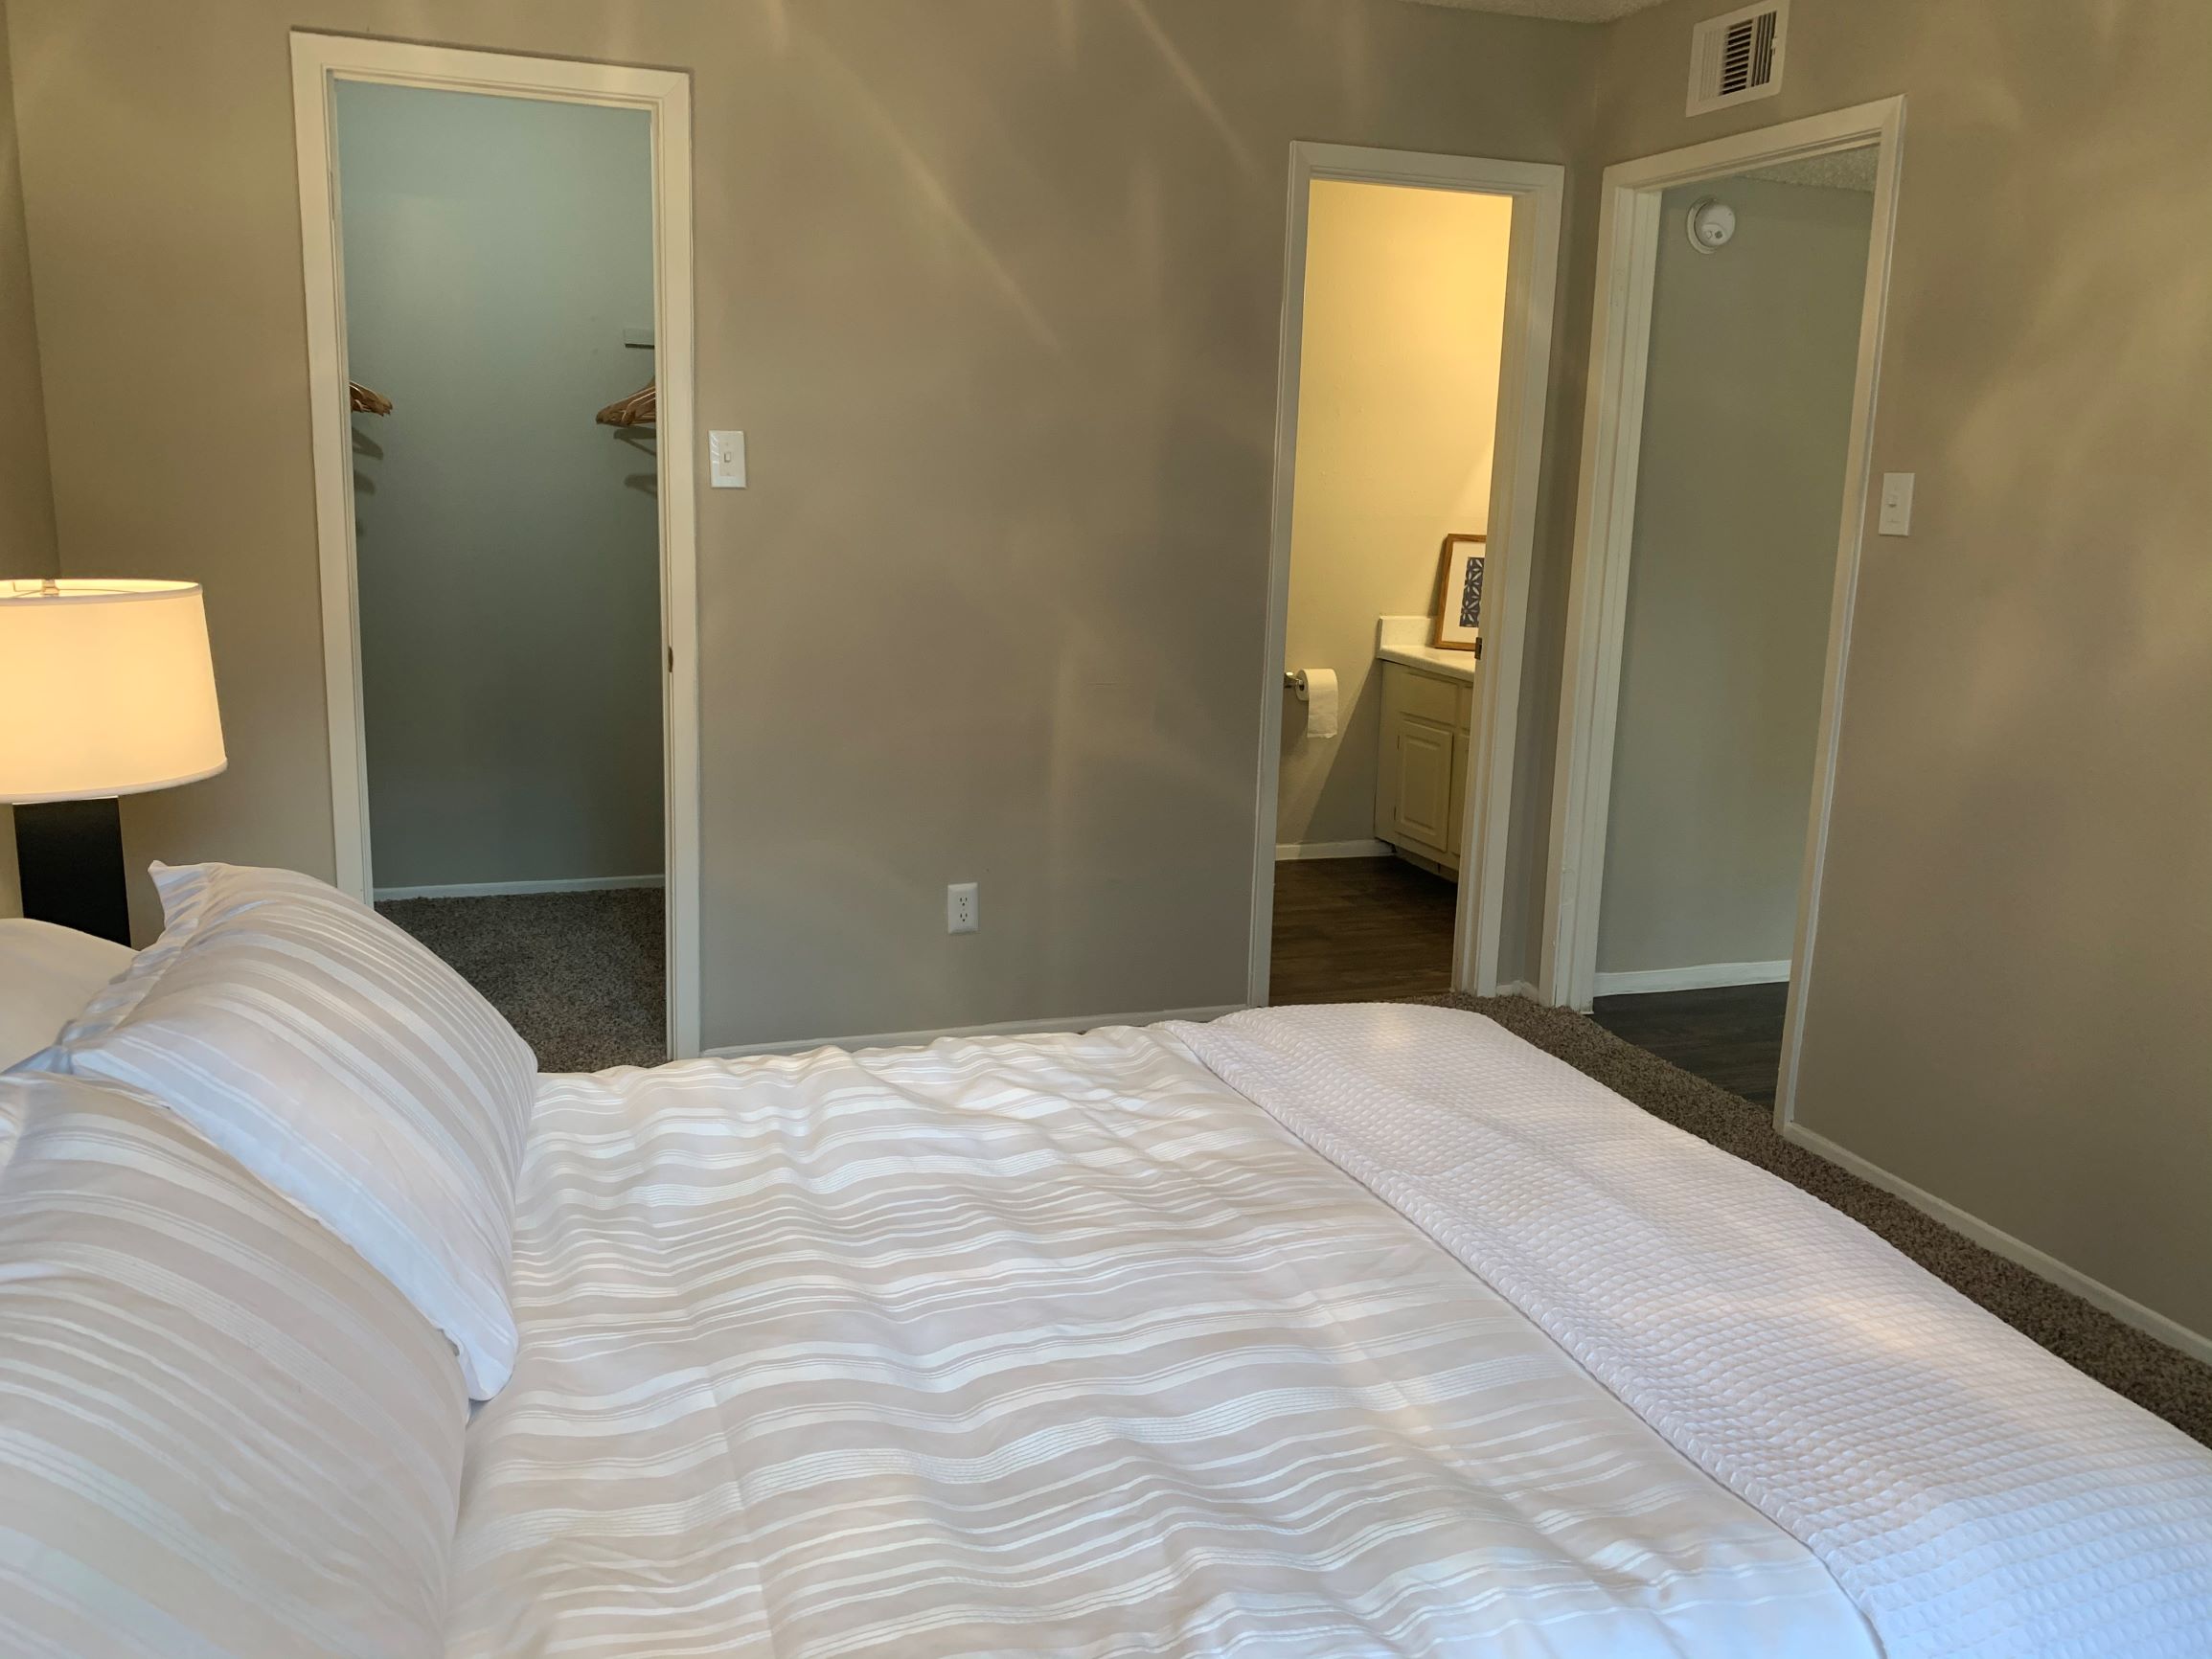 Bedrooms With Built-in Closets at Sapphire Apartments in San Antonio, TX